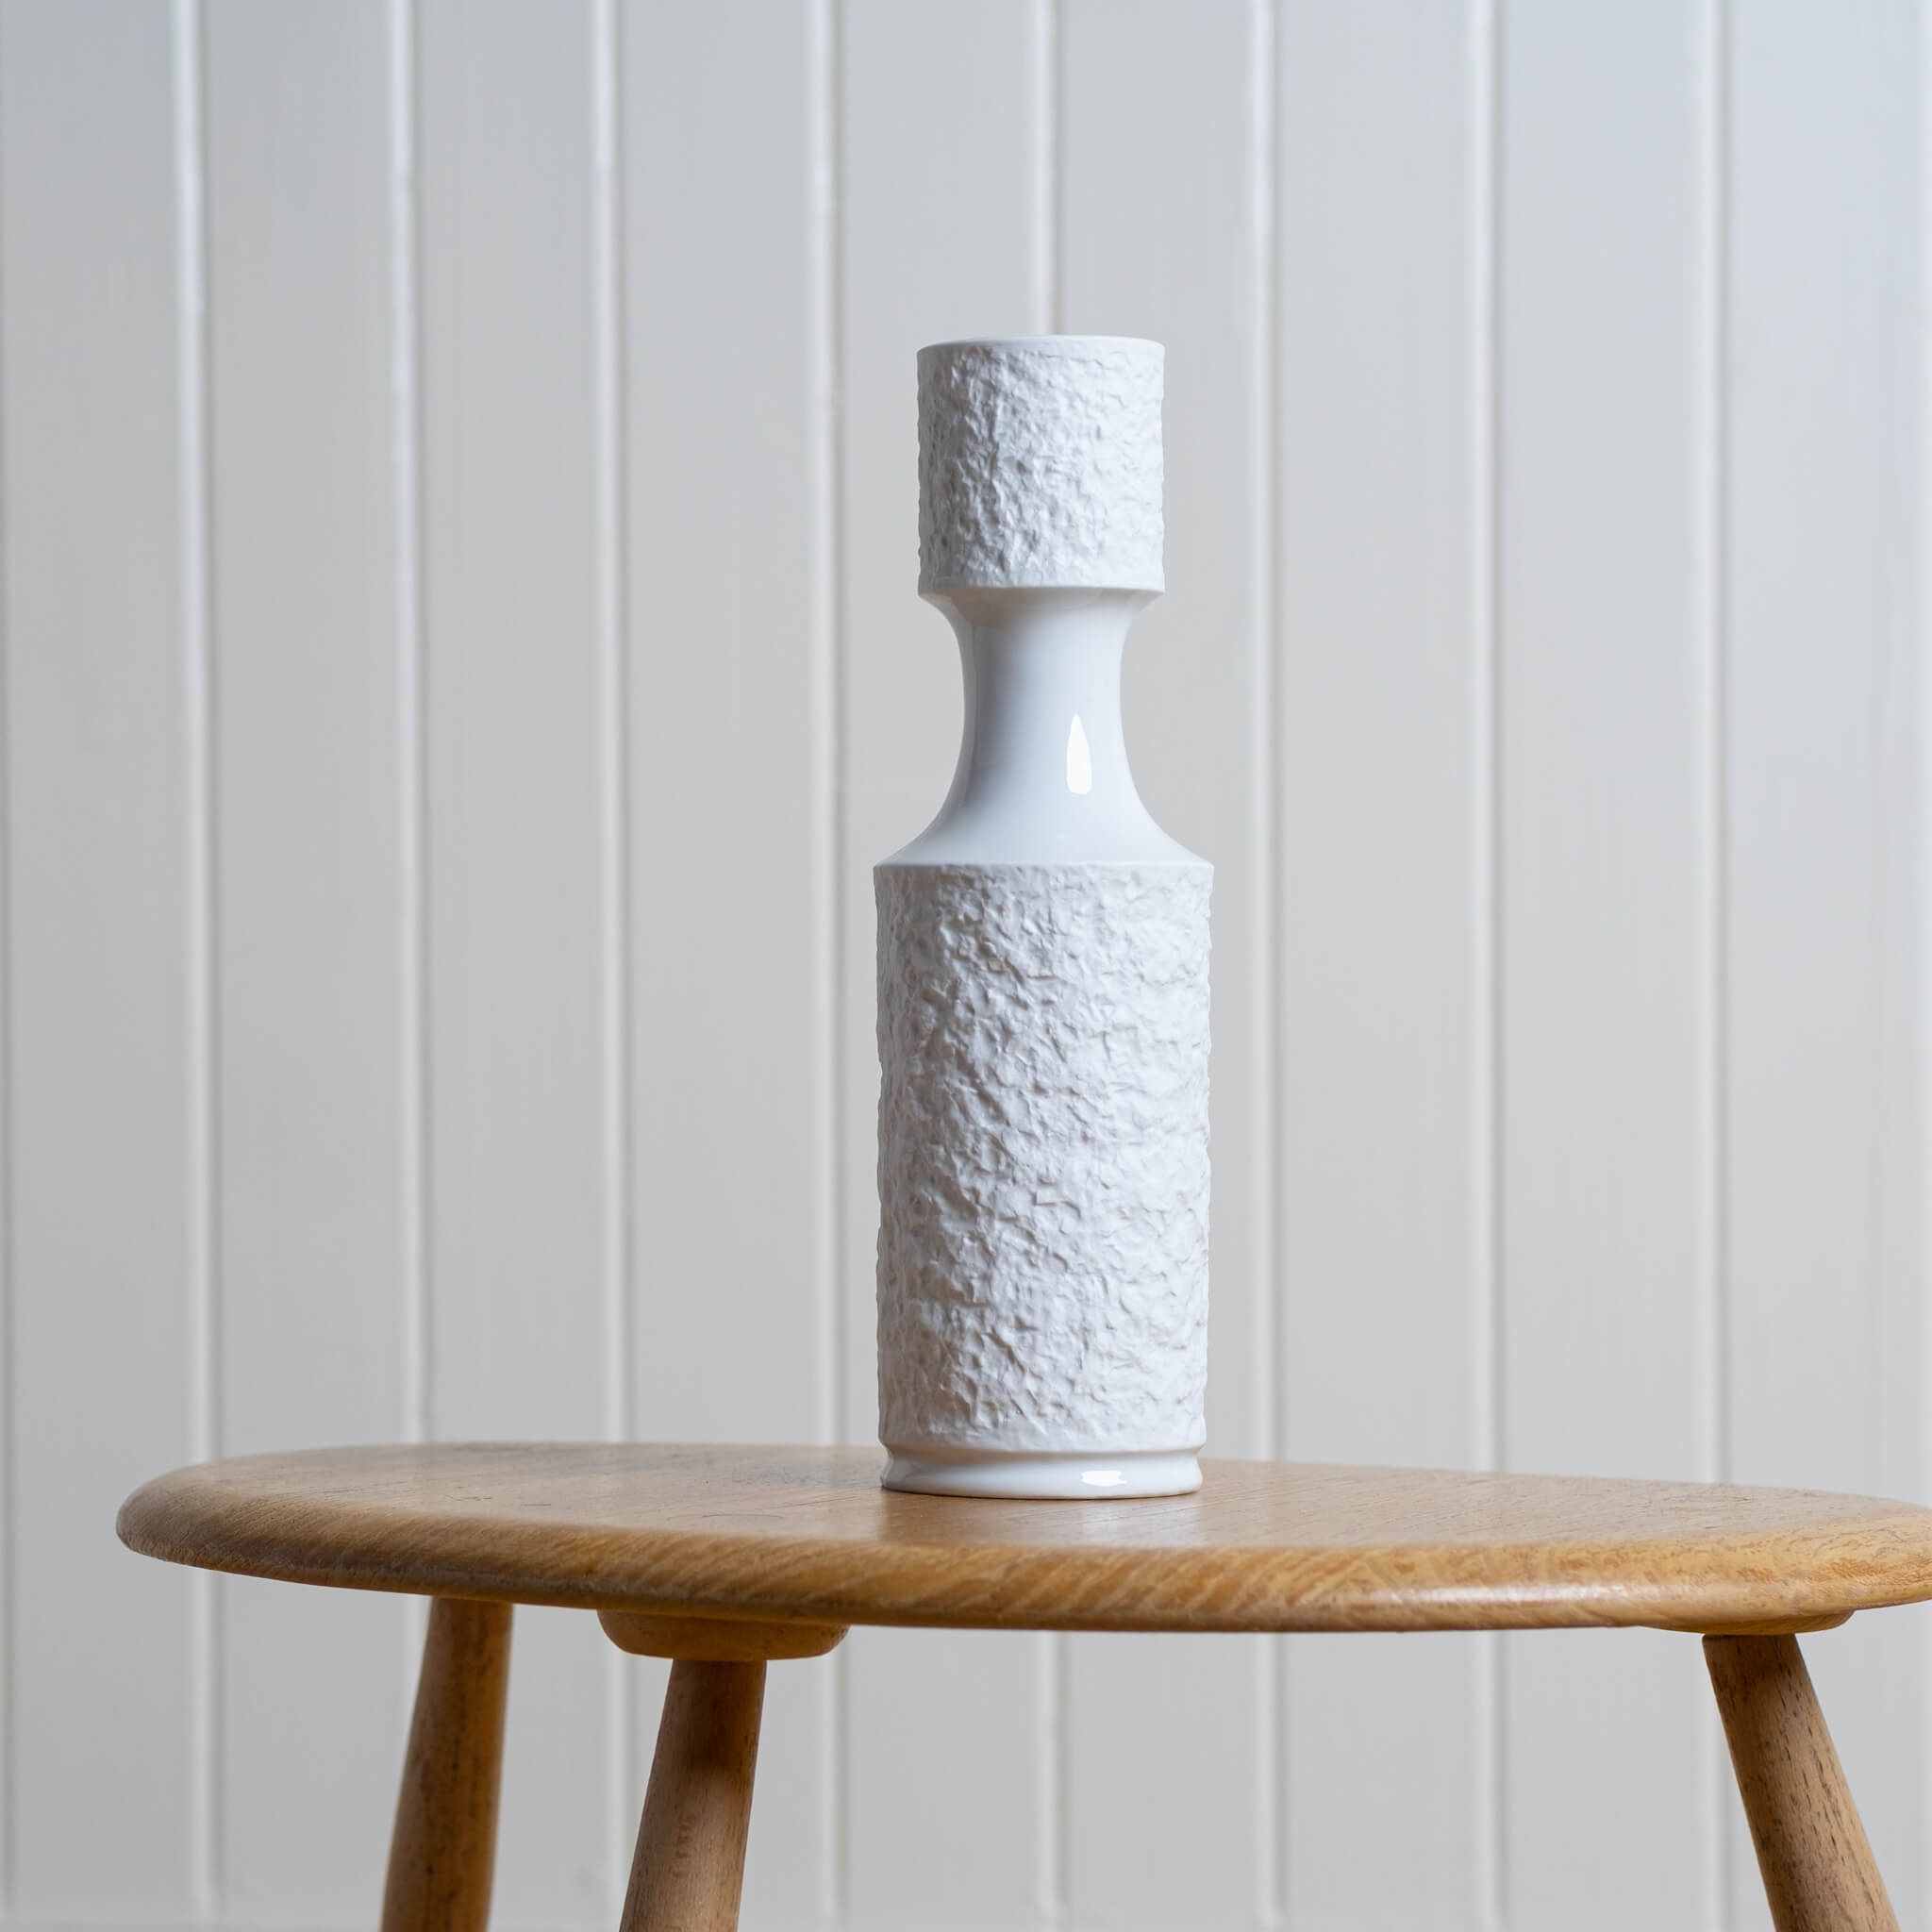 Vintage Op Art Royal KPM Tall Textured Vase with white matt bisque glaze on a table